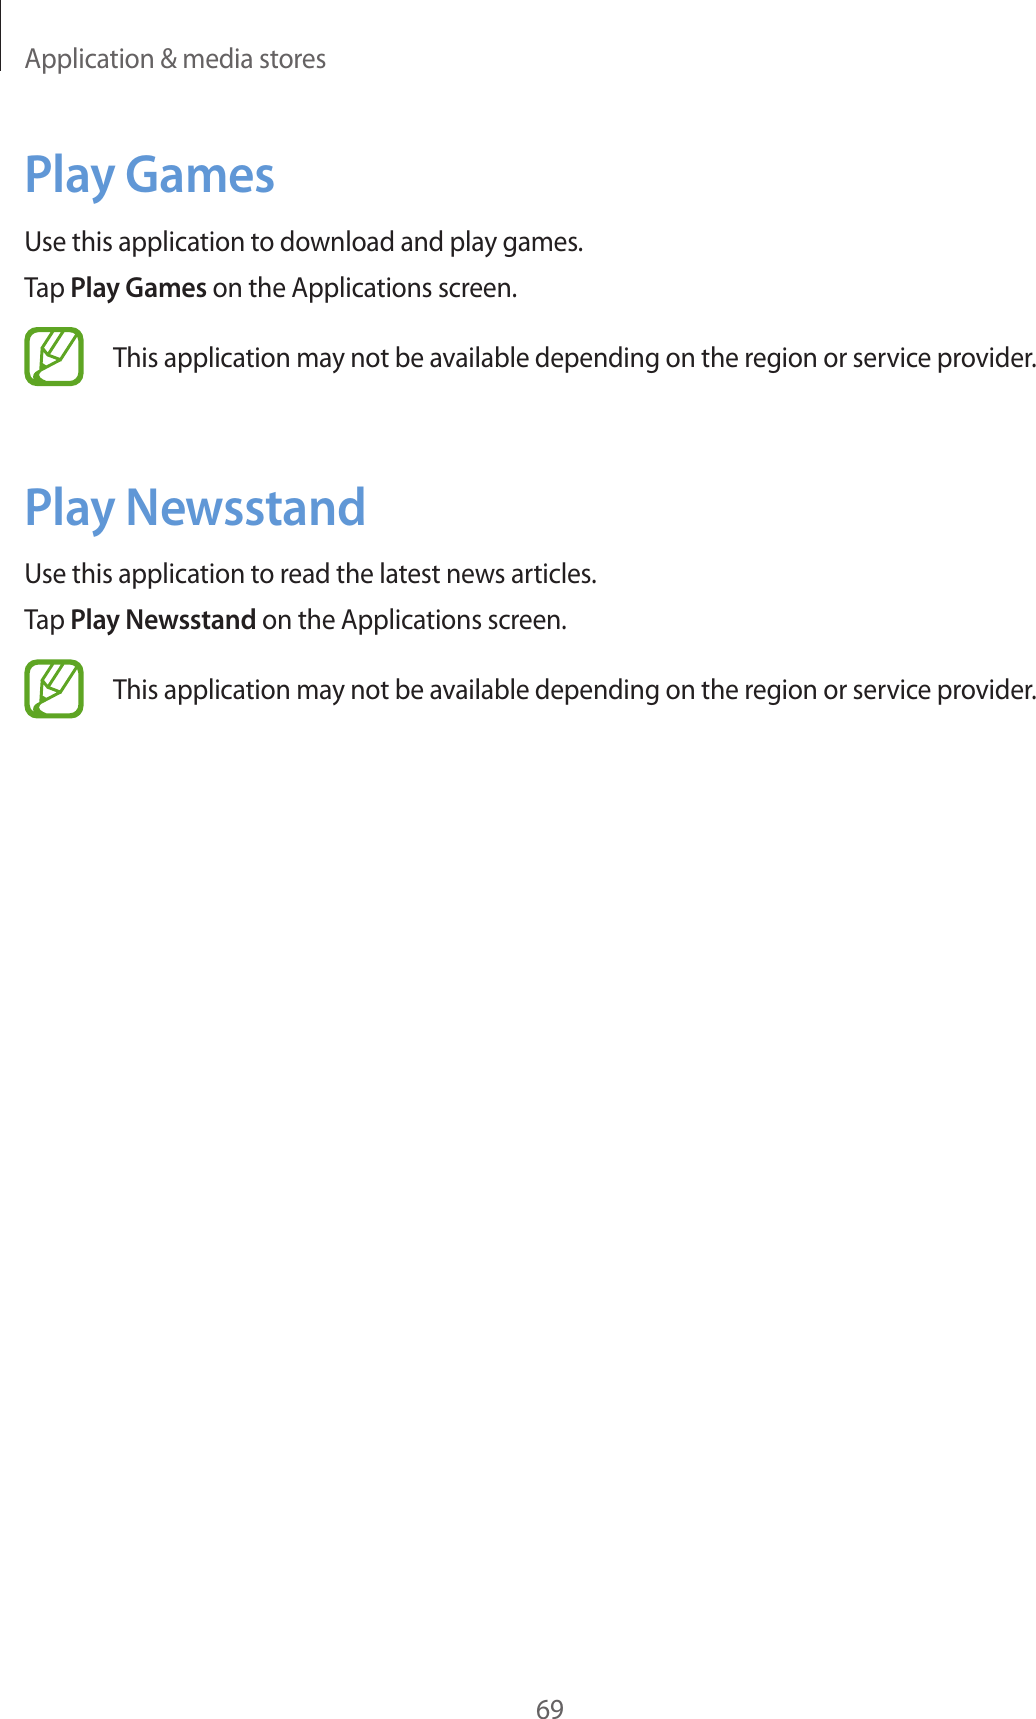 Application &amp; media stores69Play GamesUse this application to download and play games.Tap Play Games on the Applications screen.This application may not be available depending on the region or service provider.Play NewsstandUse this application to read the latest news articles.Tap Play Newsstand on the Applications screen.This application may not be available depending on the region or service provider.